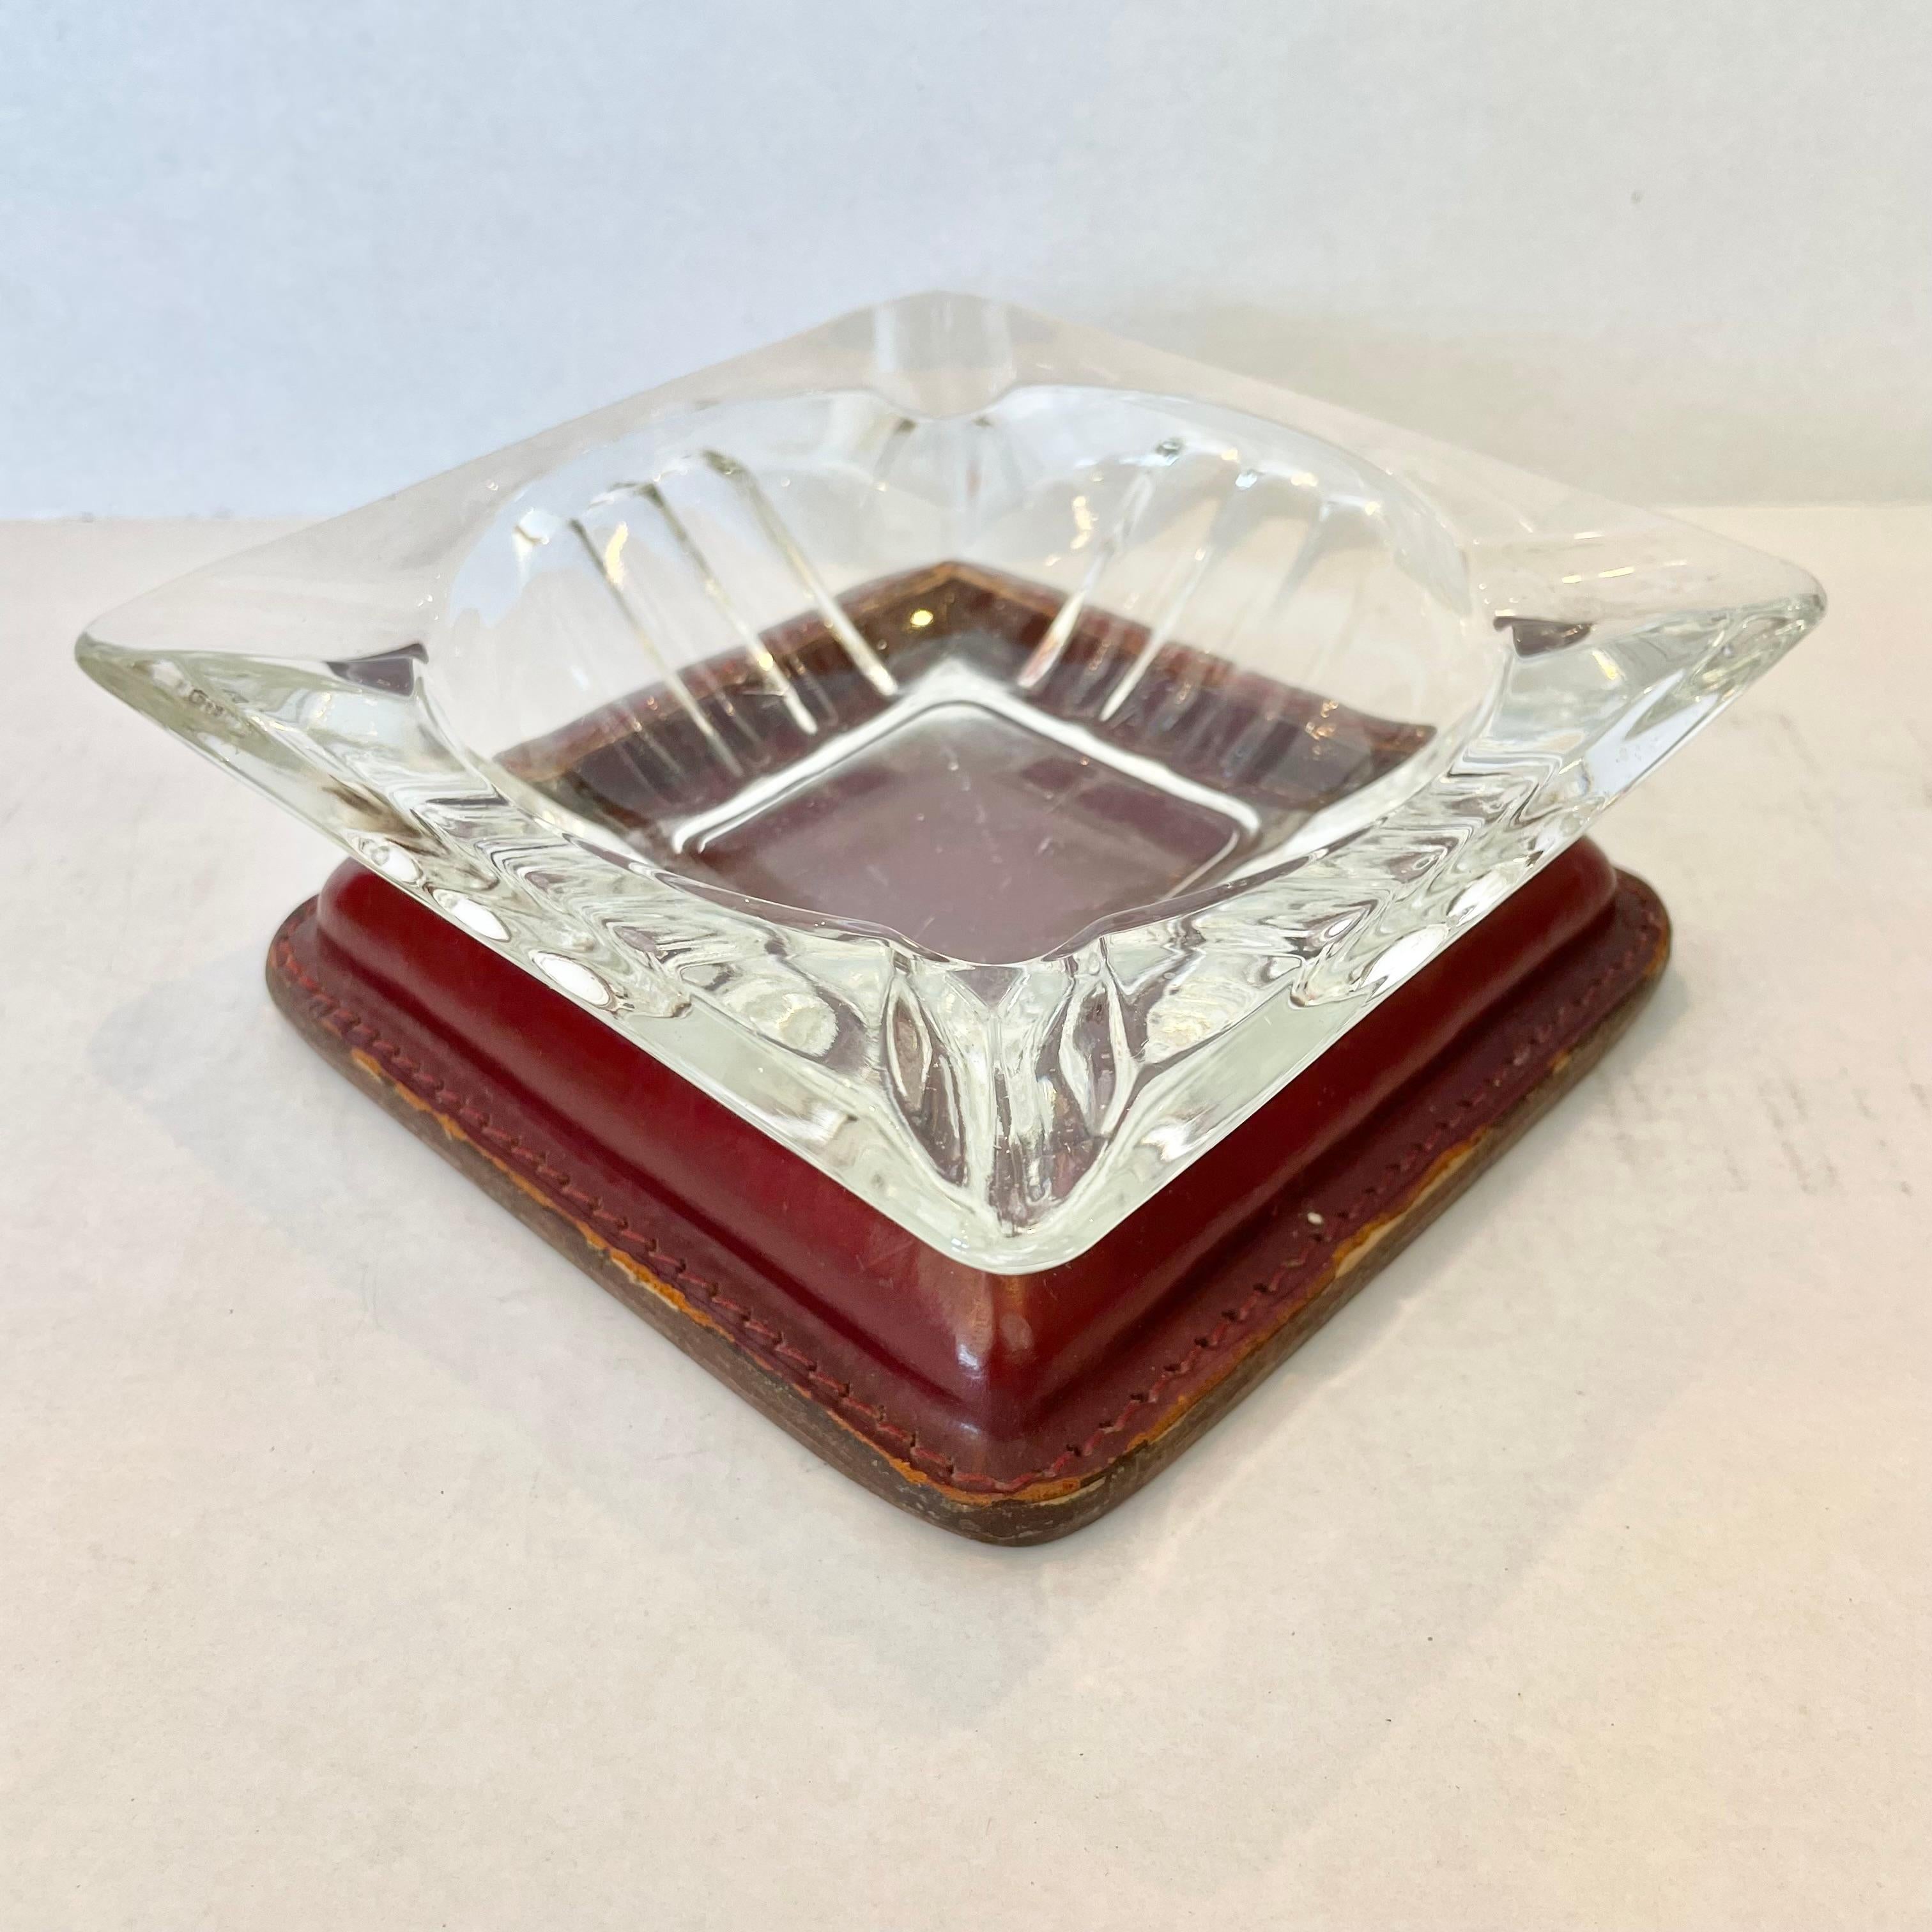 Classic leather and glass catchall / ashtray by French modernist designer Jacques Adnet. Rich oxblood leather base with stitching around the edges and a circular inset cutout. Crystal glass with circular base sits nicely inside with a cigarette